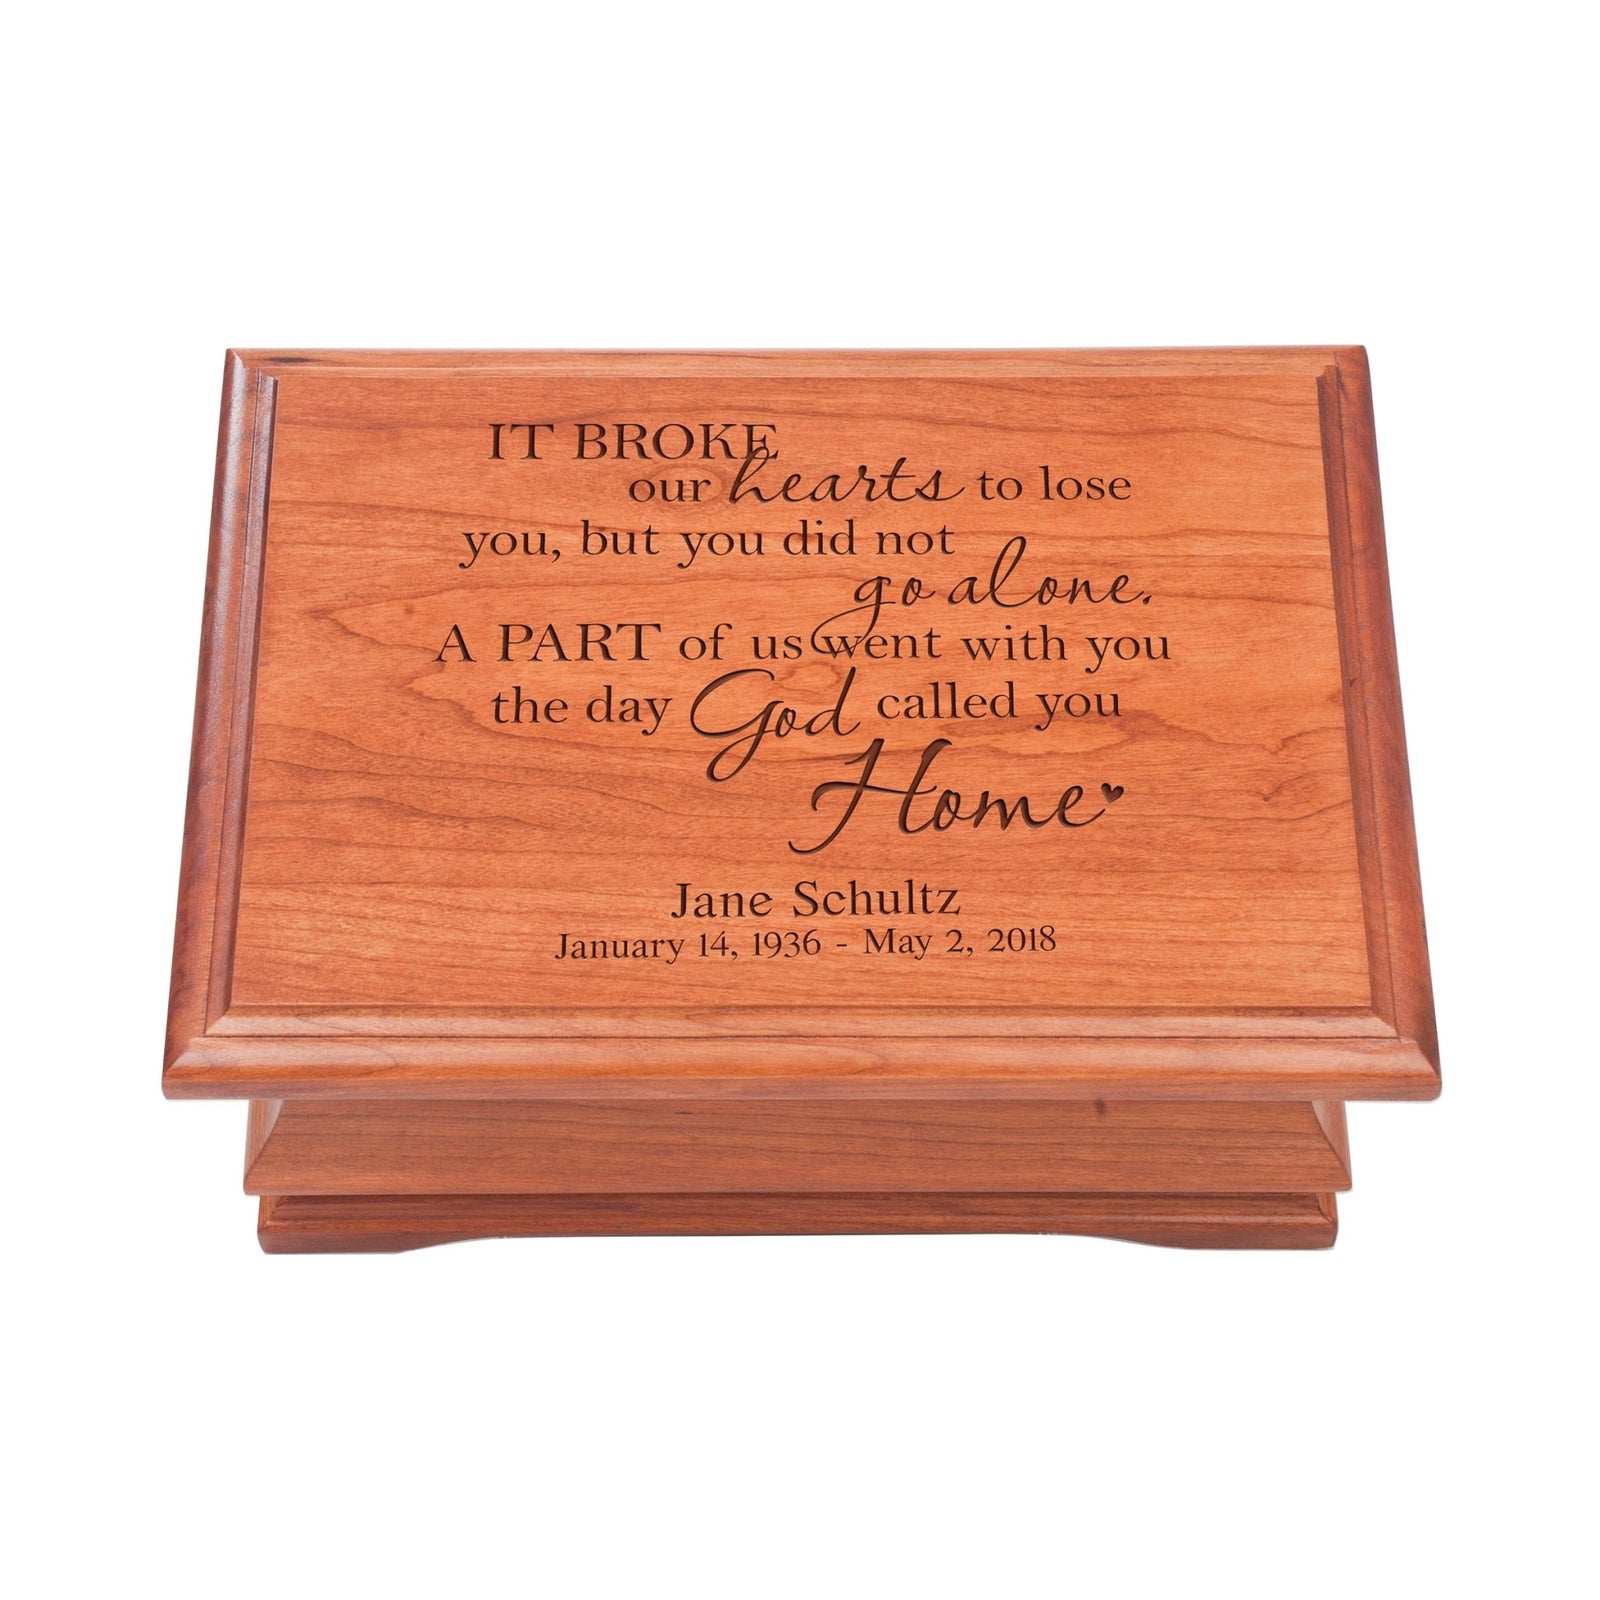 Personalized Wooden Memorial Jewelry Box Organizer 11.5x8.25 – It Broke Our Hearts - LifeSong Milestones